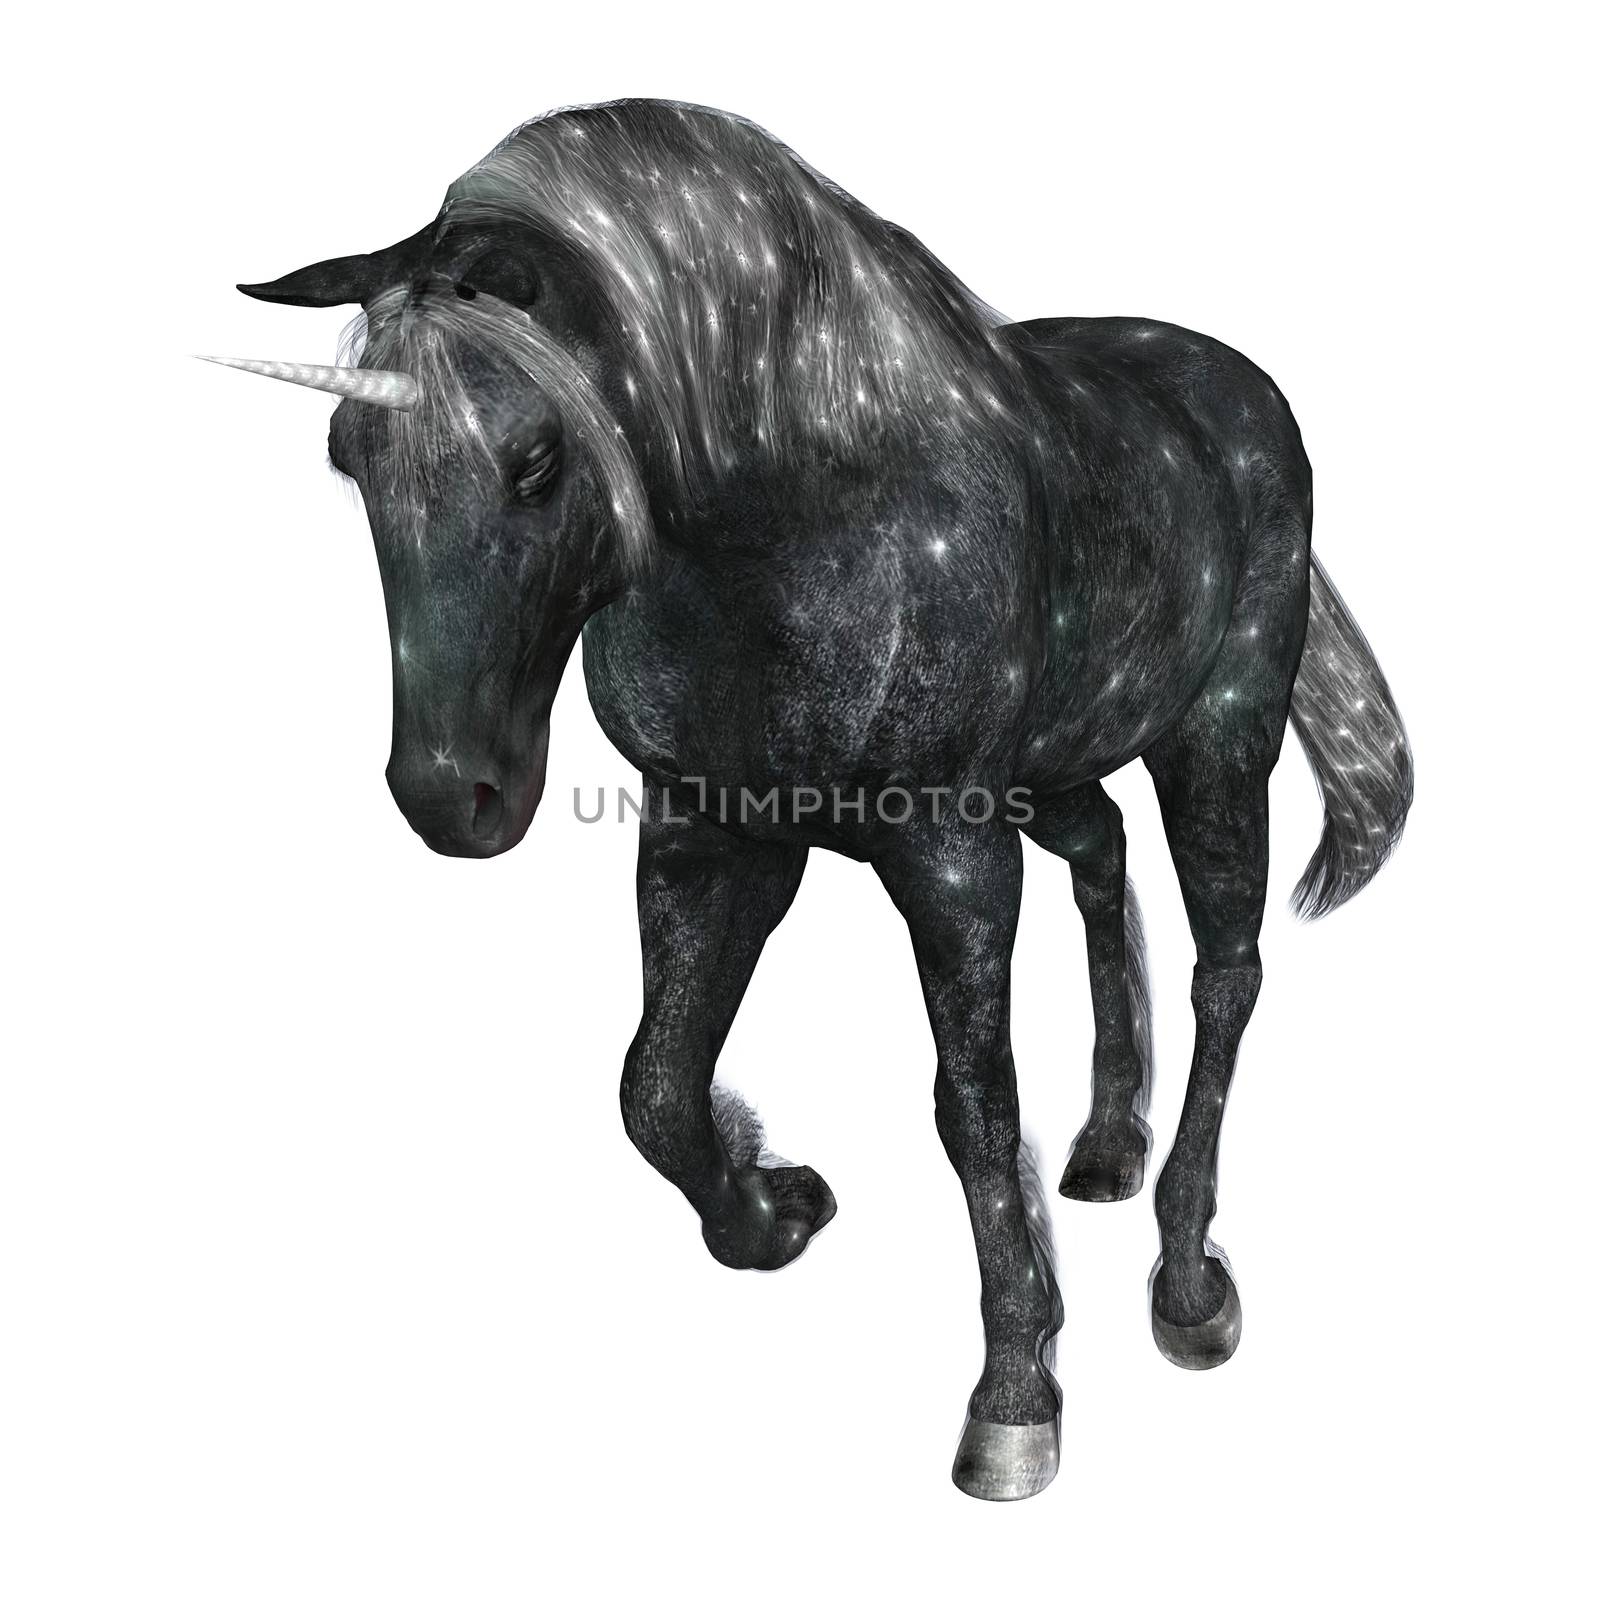 3D digital render of a beautiful sparkling fantasy unicorn isolated on white background